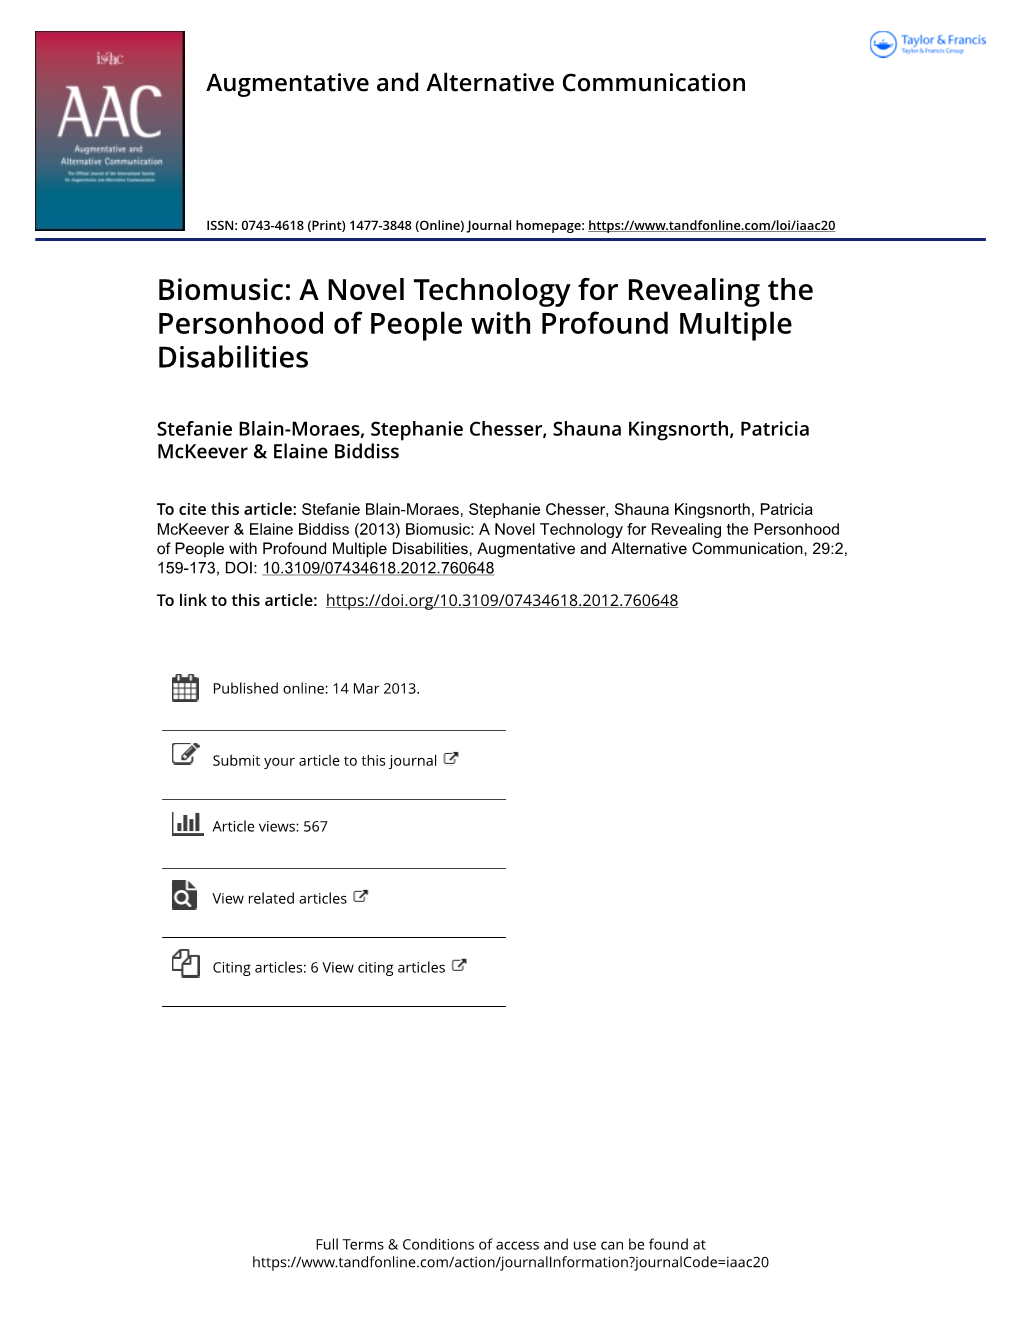 Biomusic: a Novel Technology for Revealing the Personhood of People with Profound Multiple Disabilities